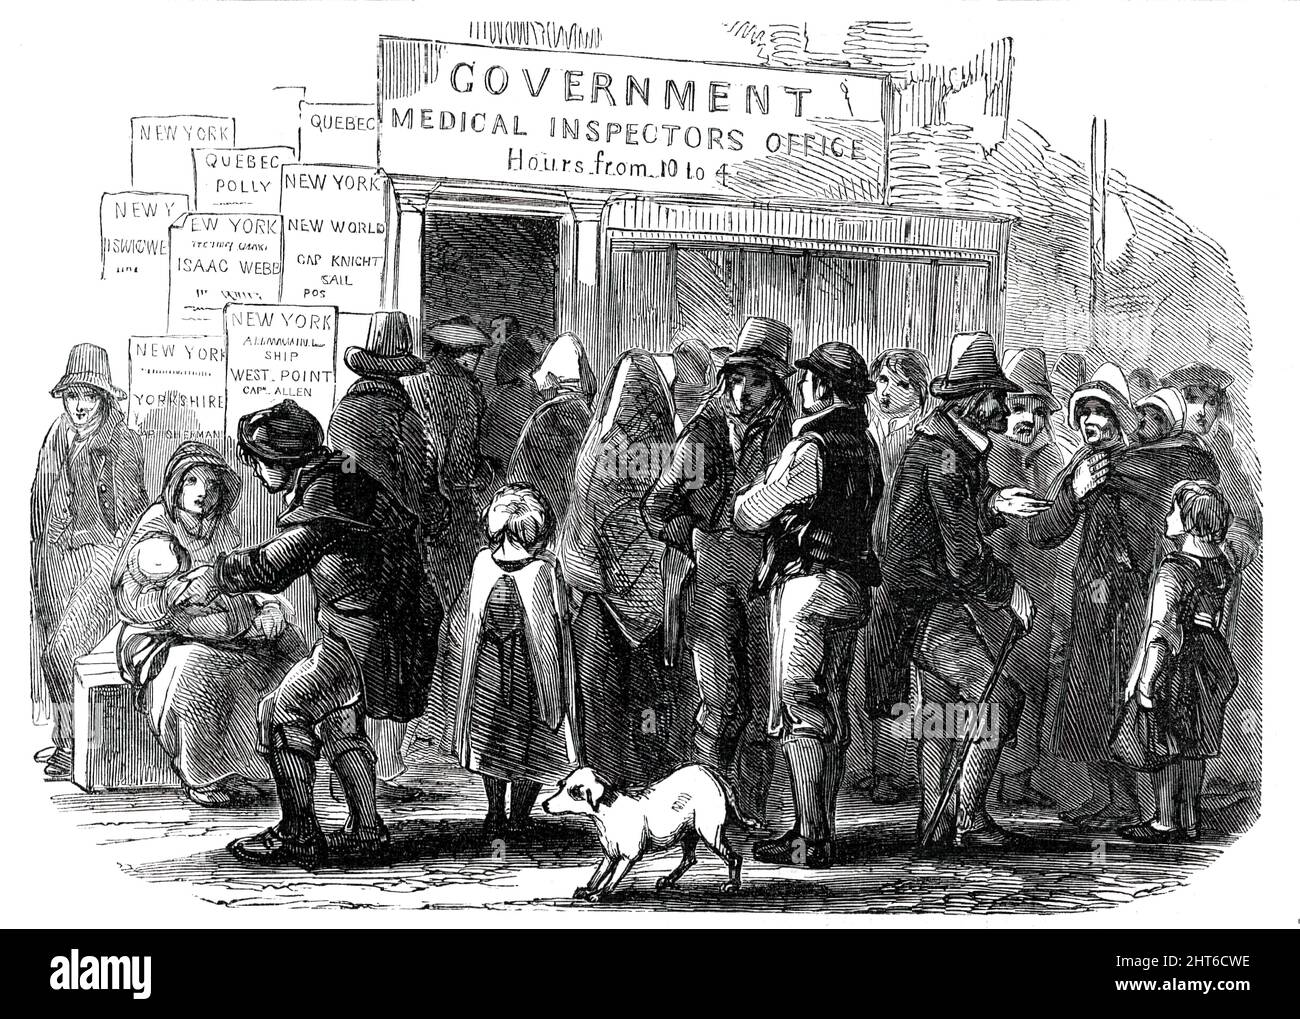 The Government Inspector's Office, 1850. British emigrants being checked before leaving for the colonies: '...no passenger-ship is allowed to proceed until a medical practitioner appointed by the emigration office of the port shall have inspected the medicine-chest and passengers, and certified that...the passengers are free from contagious disease. All persons who may be discovered to be affected with any infectious disease...are to be re-landed, with those members of their families, if any, who may be dependent on them, or unwilling to be separated from them, together with their clothes and Stock Photo